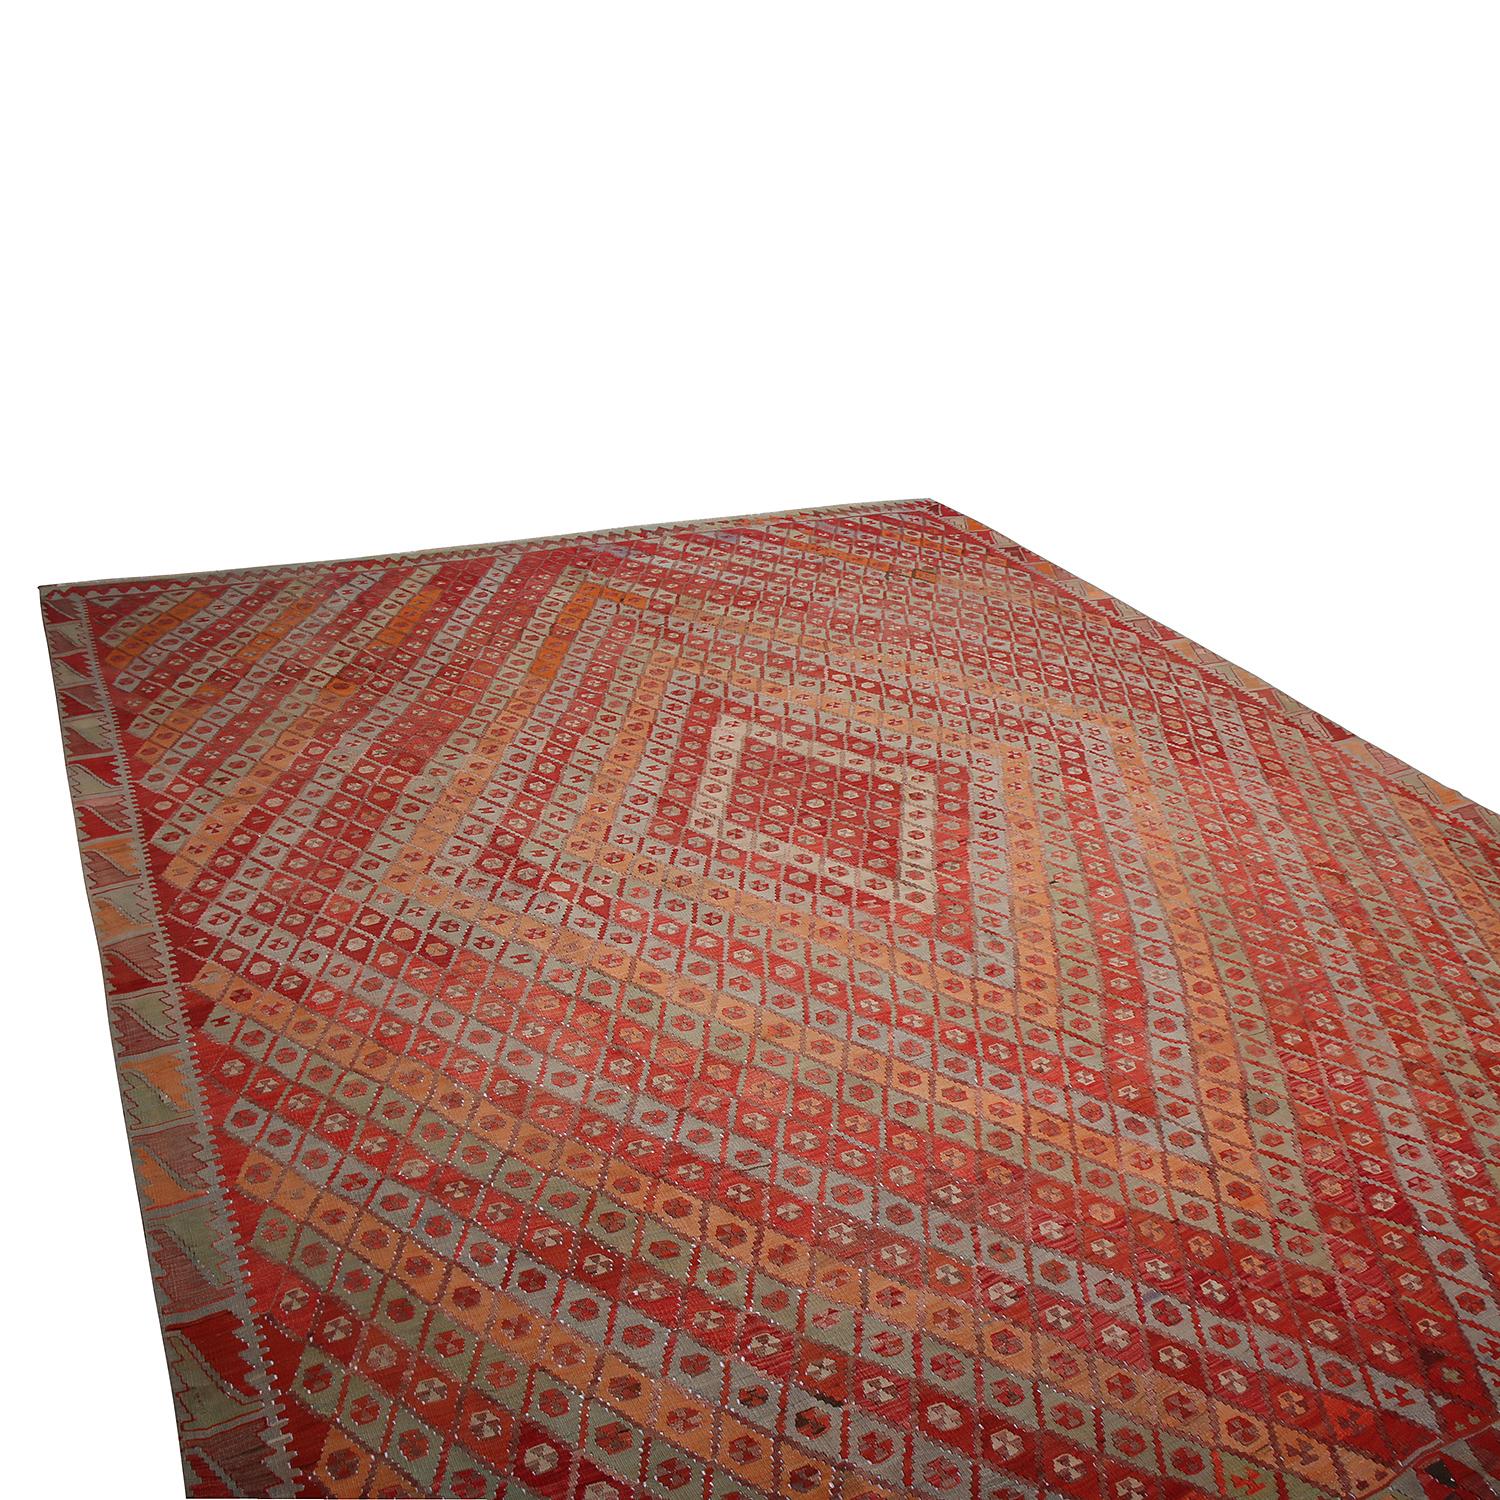 Handwoven in Turkey originating between 1950-1960, this vintage midcentury wool Kilim hails from the town of Sarkisla (Sarkisla) in the Sivas province, a widely regarded local of acclaimed Central Anatolian rarities. The diamond pattern in this